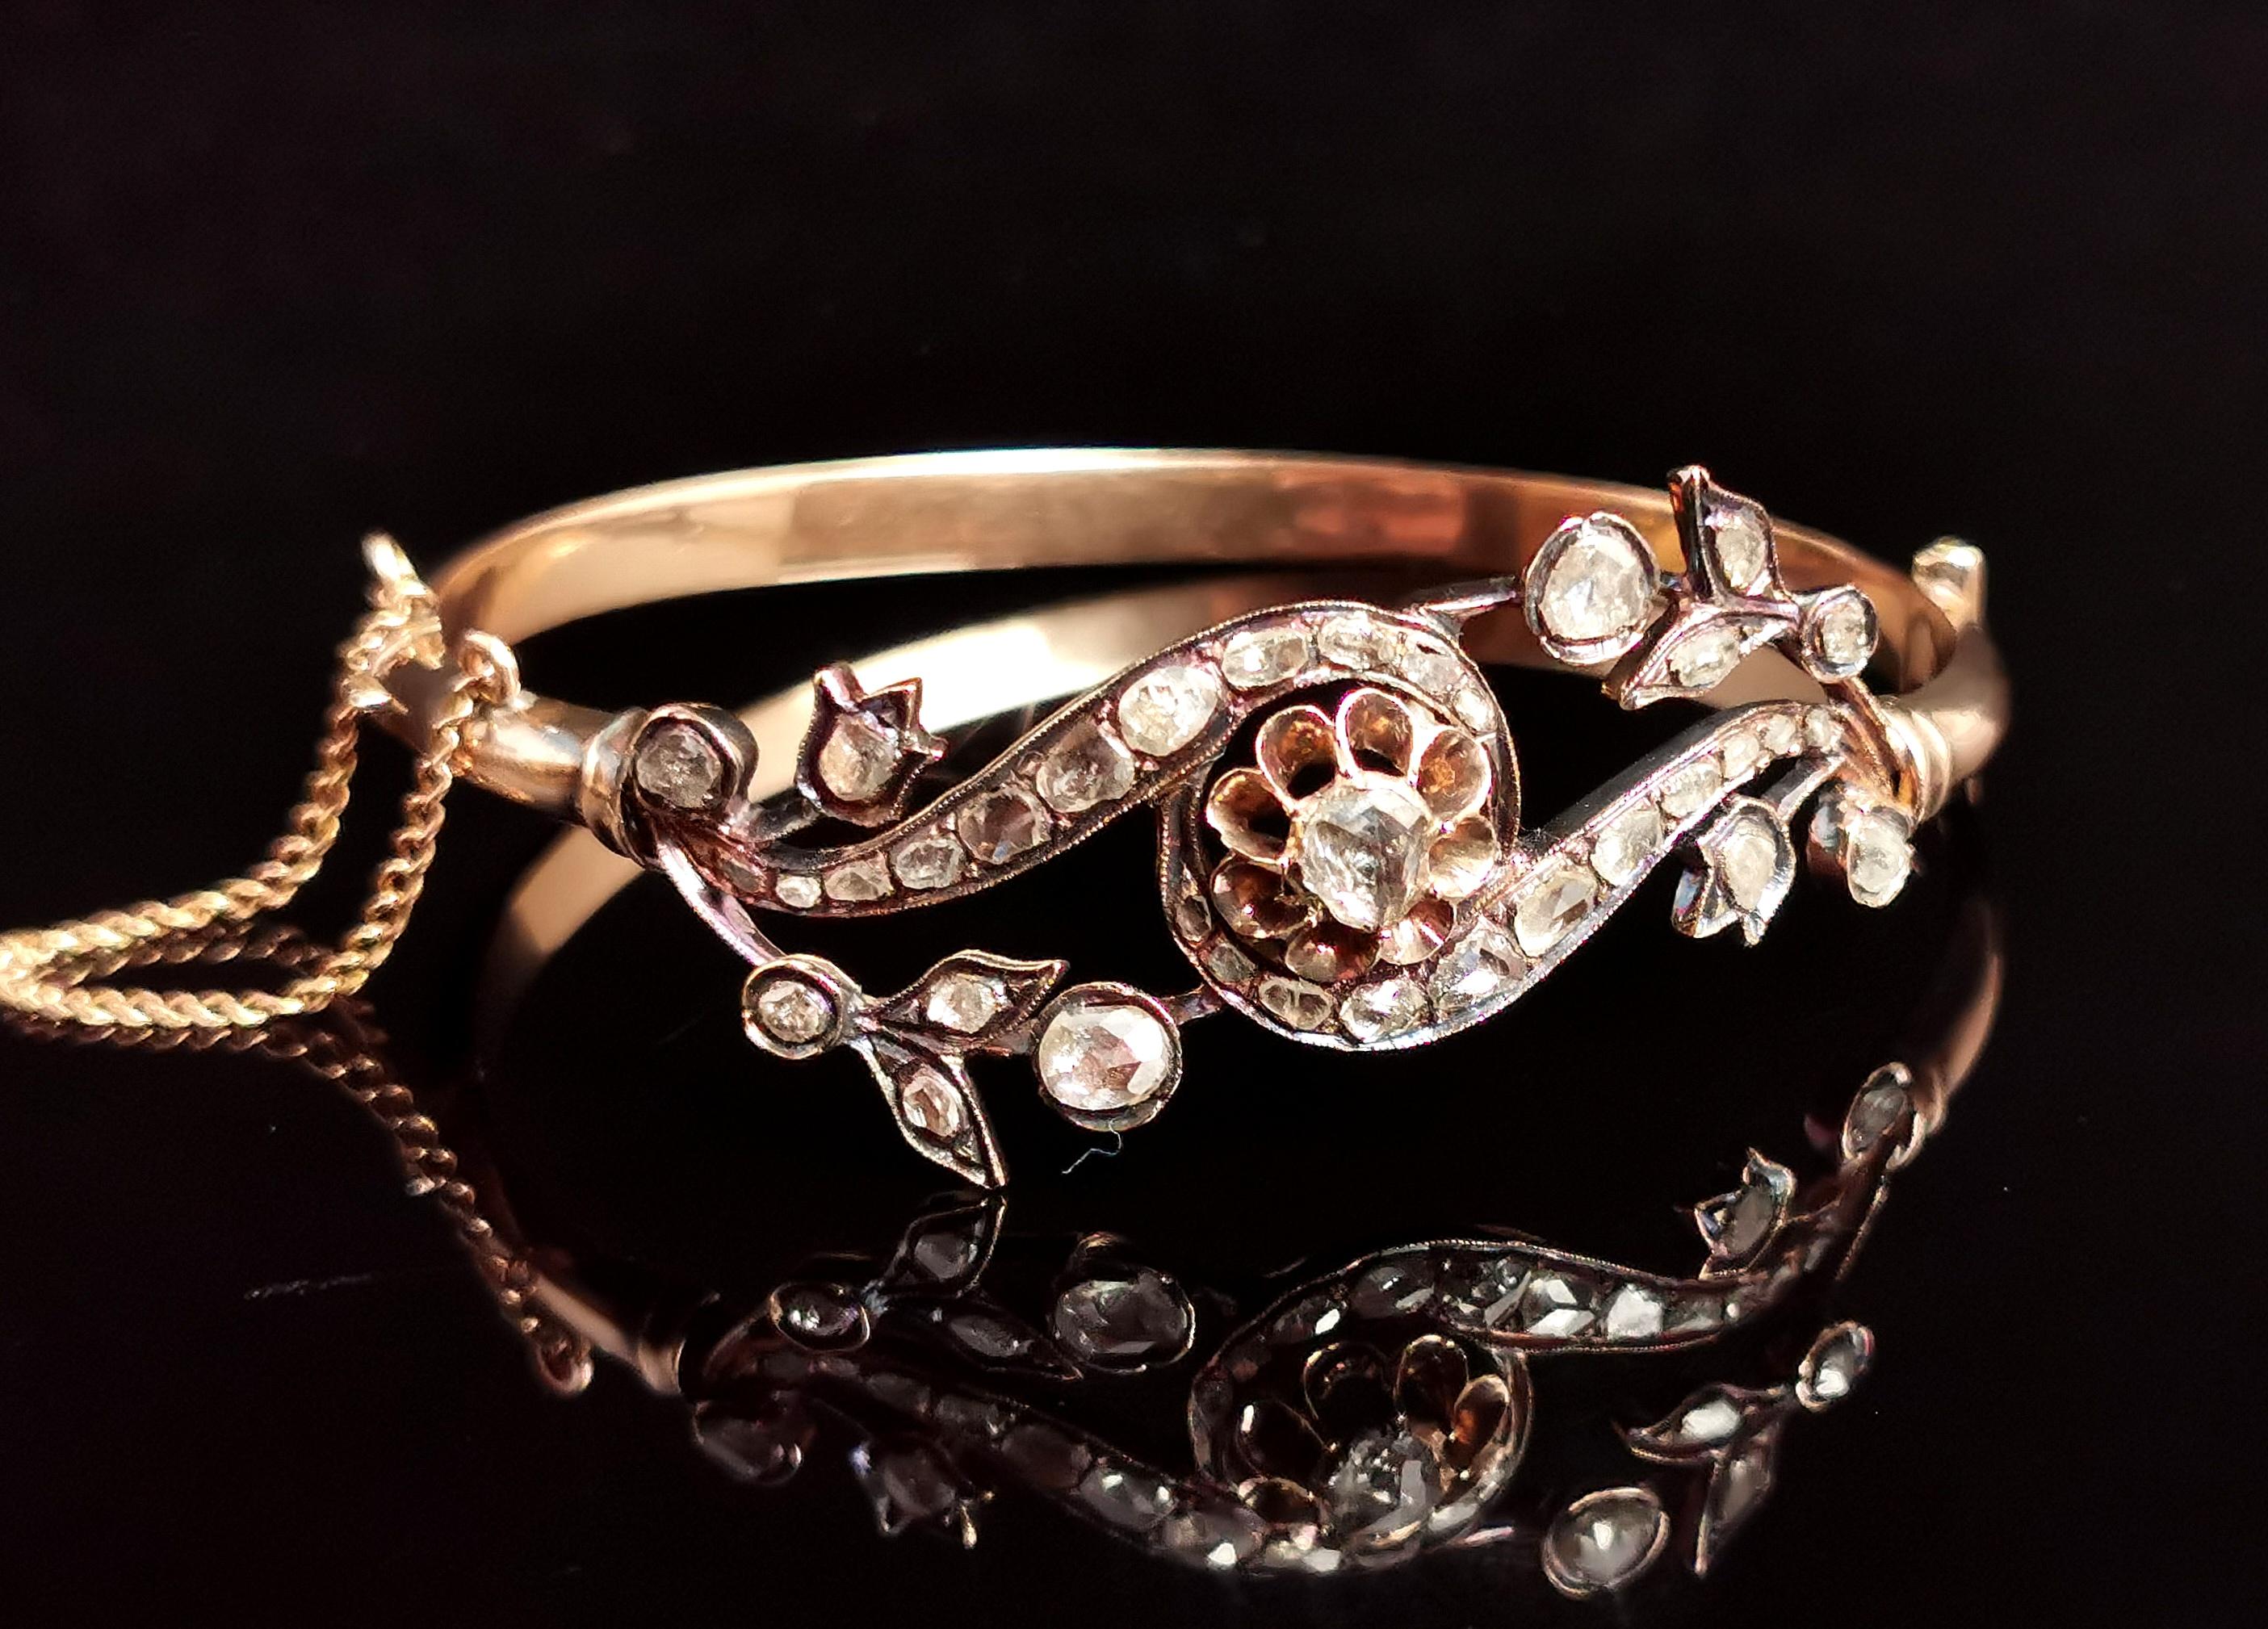 If you are looking for a bangle that wows then this antique, Victorian era Rose cut diamond bangle is the perfect choice!

Expertly crafted in rich 18ct gold with slight rosey tones, it has a smooth polished finish to the reverse.

The face of the